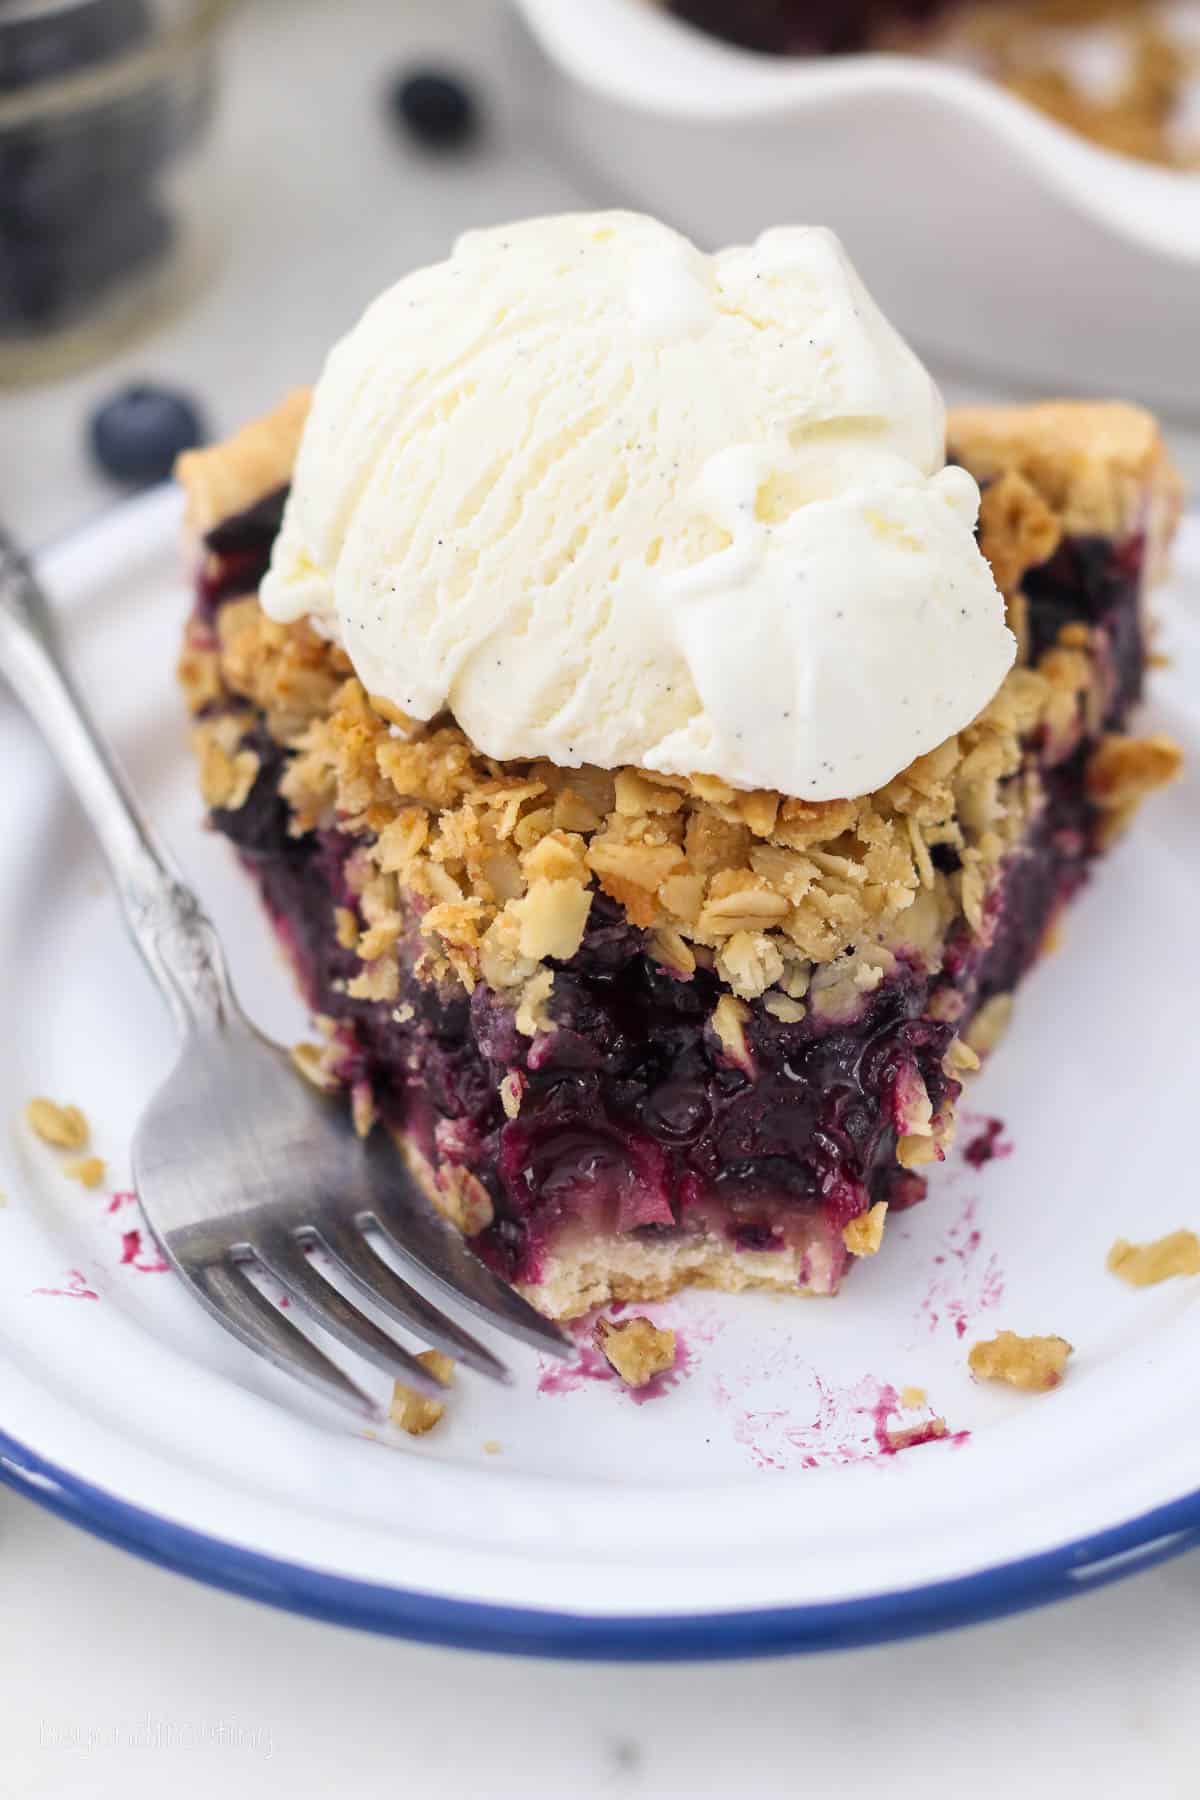 A slice of blueberry crumble pie on a white plate with a forkful missing, topped with a scoop of vanilla ice cream.